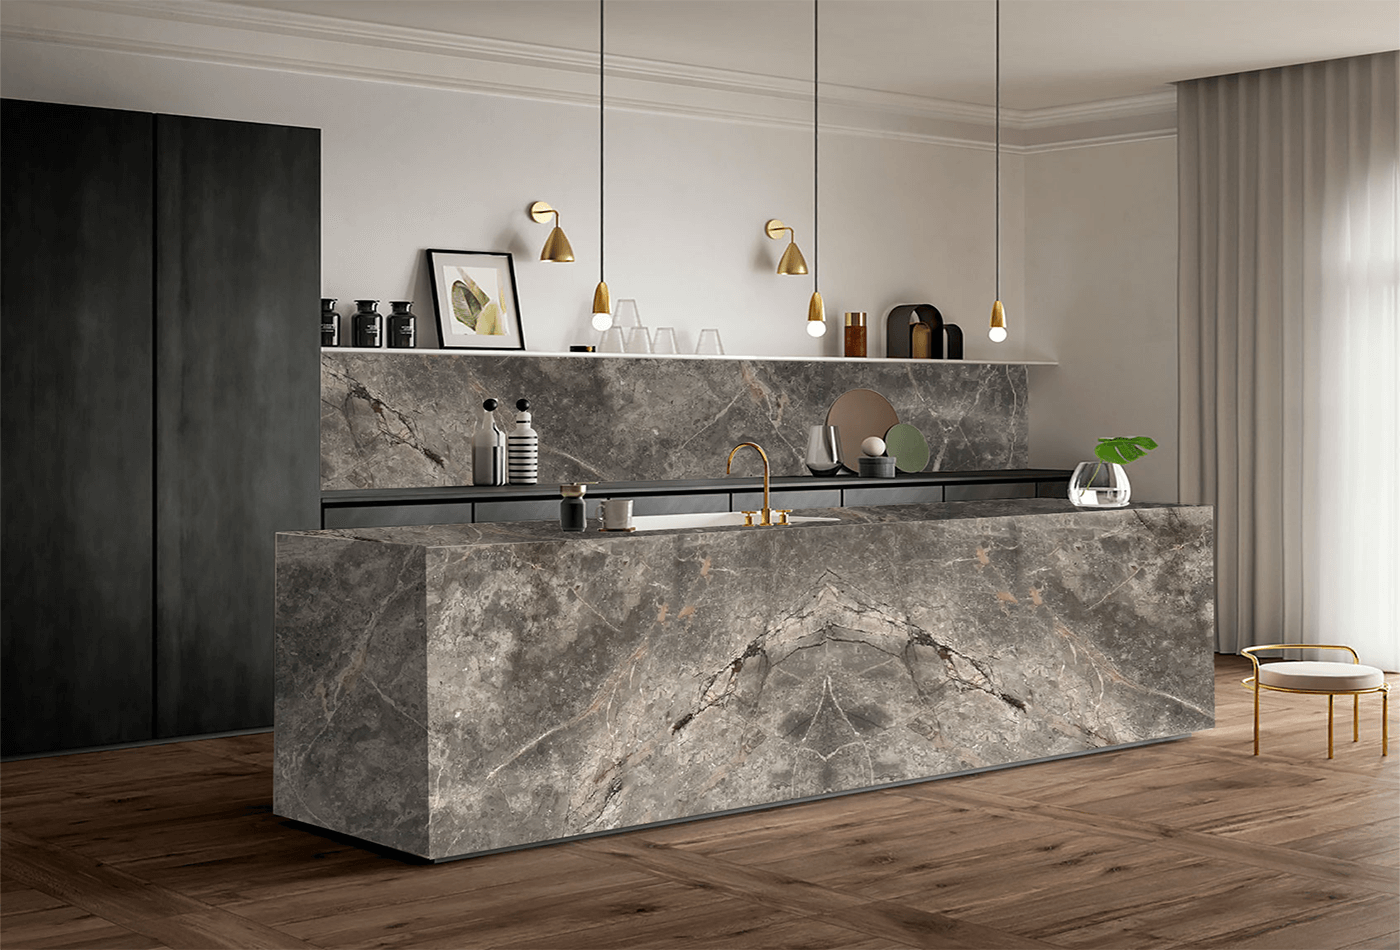 Fior di Bosco Marble Bookmatch; Style More on Your Kitchen